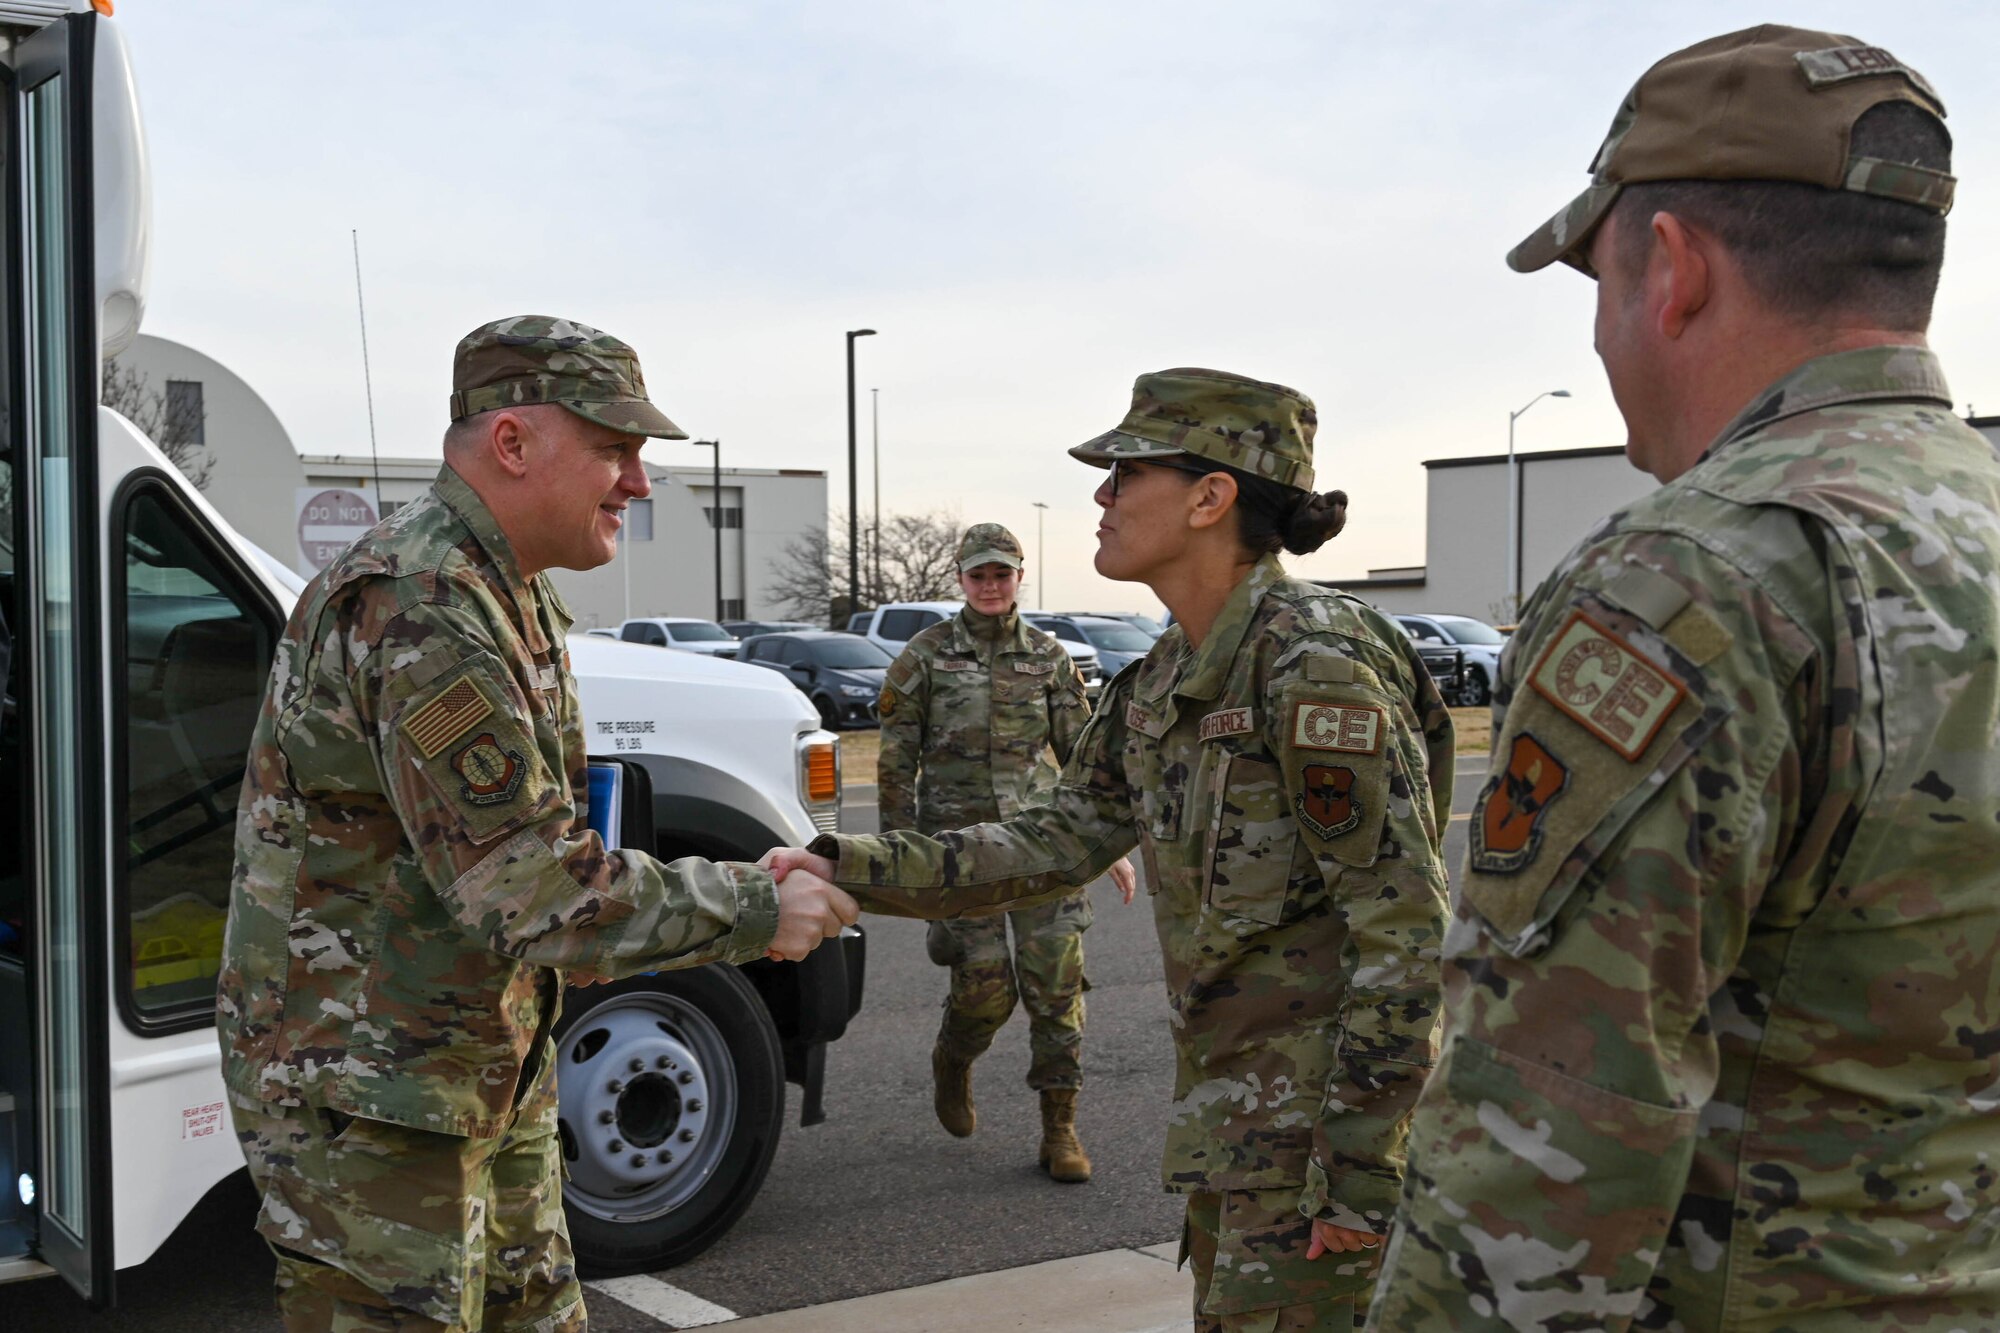 U.S. Air Force Lt. Col. Teresa Rose, 97th Civil Engineer Squadron (CES) individual mobilization augmentee, and Maj. David Leonard, 97th CES operations flight commander, greet Brig. Gen. William Kale, Air Force Civil Engineer Center (AFCEC) commander, at Altus Air Force Base, Oklahoma, Dec. 12, 2023. AFCEC oversees all CE requirements across the Air Force including facility investment planning, design and construction, operations support, property management and oversight, energy support, environmental compliance and restoration, and readiness and emergency management. (U.S. Air Force photo by Senior Airman Miyah Gray)